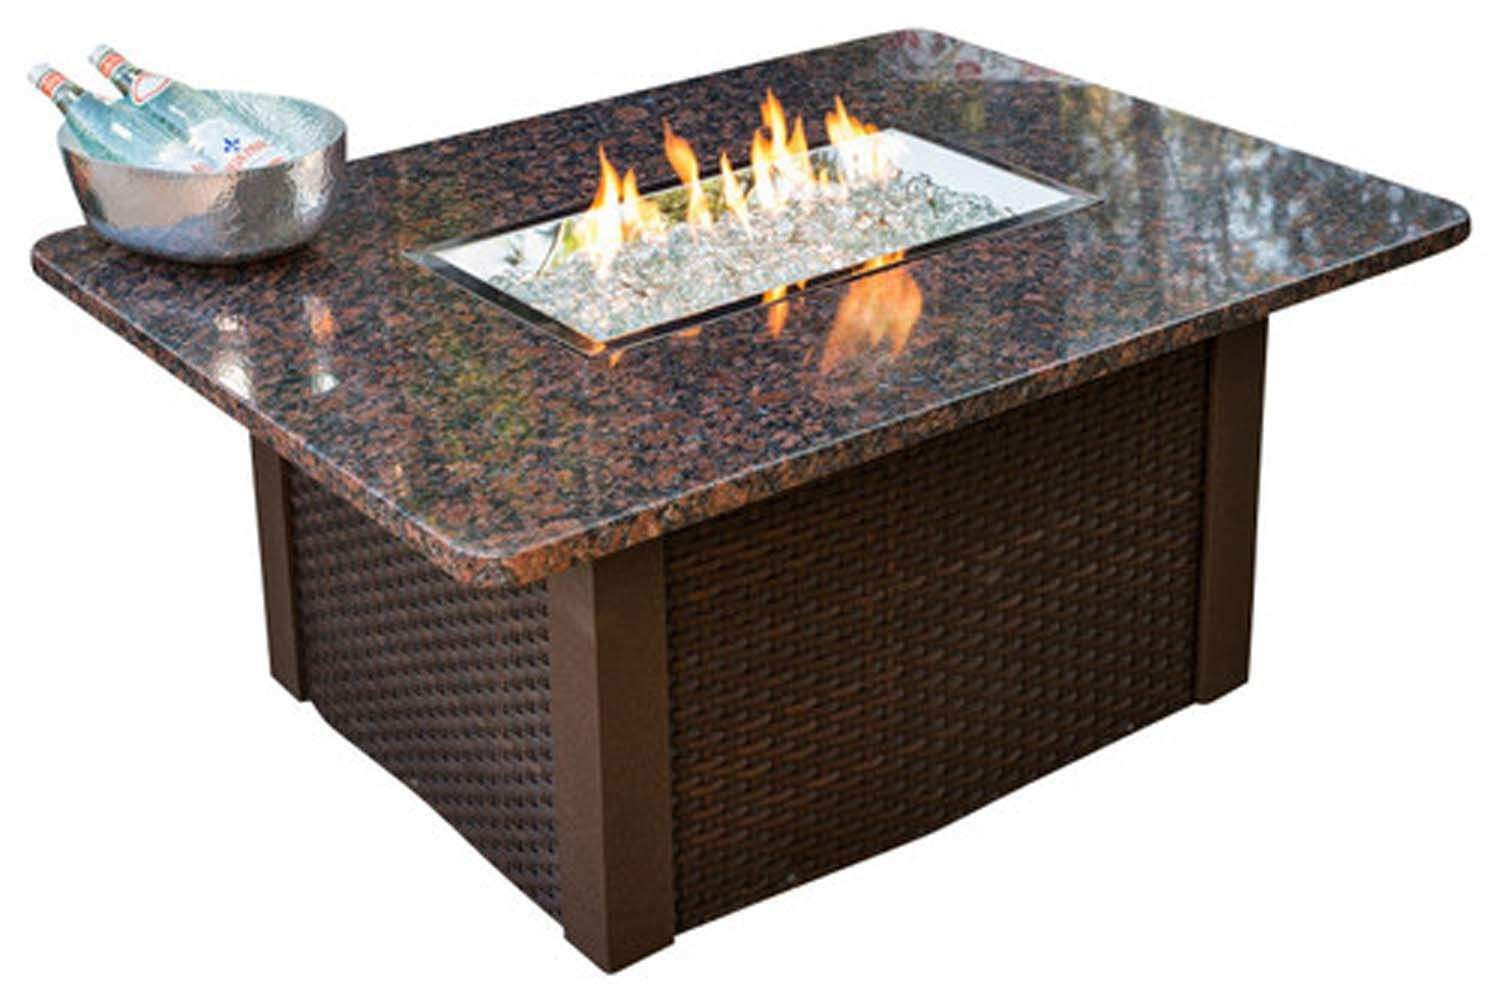 Propane Fire Pit Coffee Table
 Outdoor Greatroom Grandstone Gas Fire Pit Coffee Table